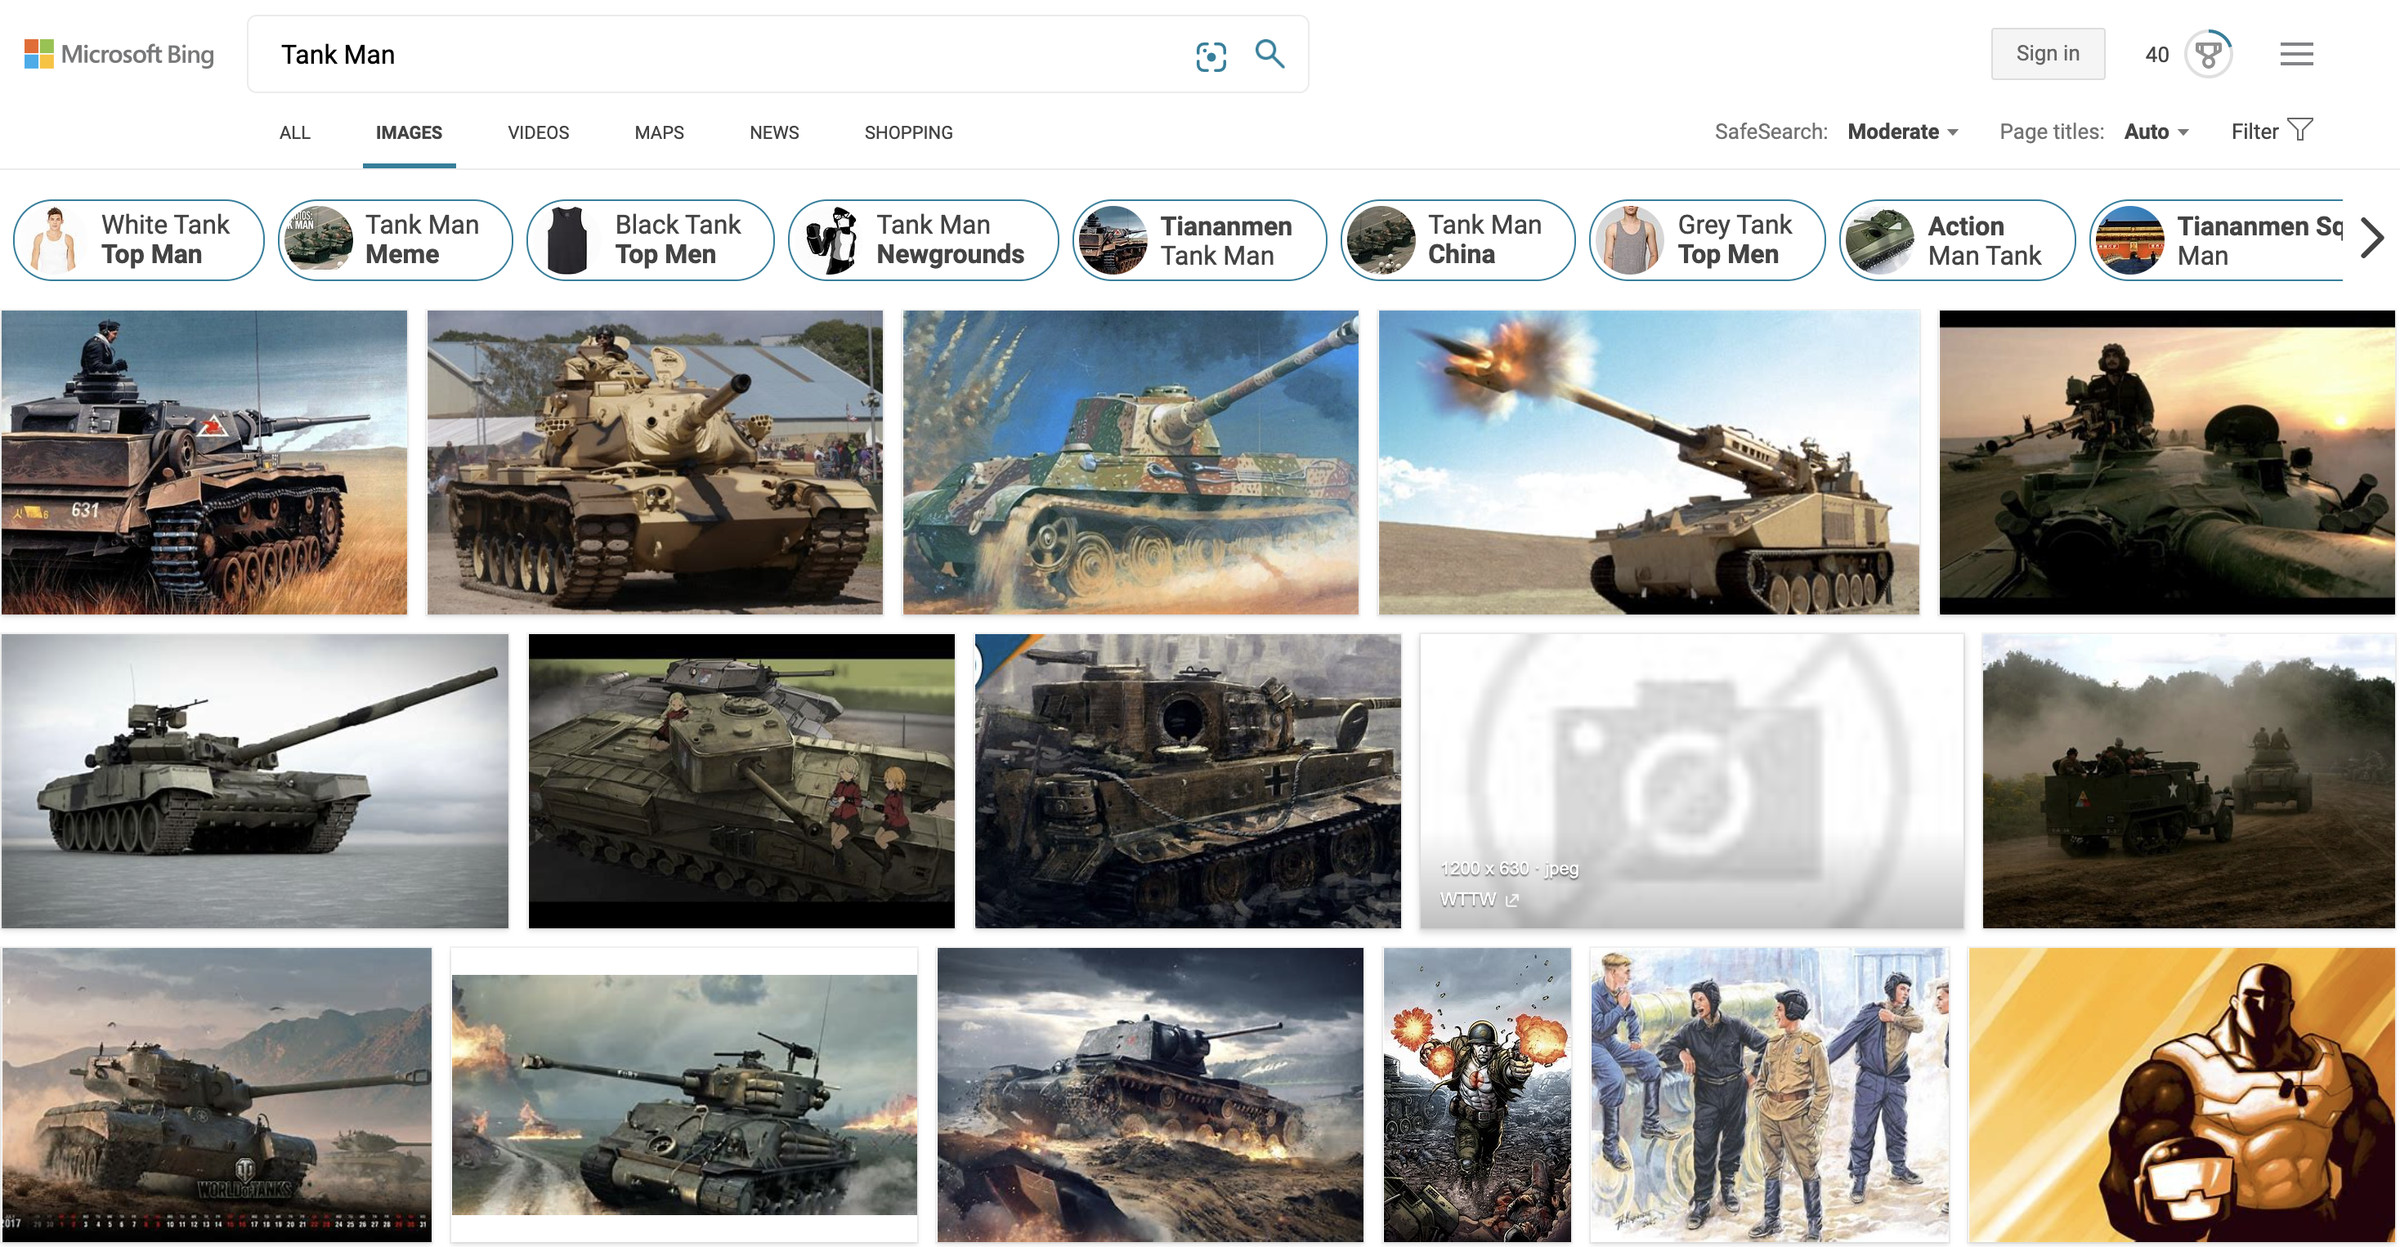 Search results for “Tank Man” after Microsoft addressed the issue.